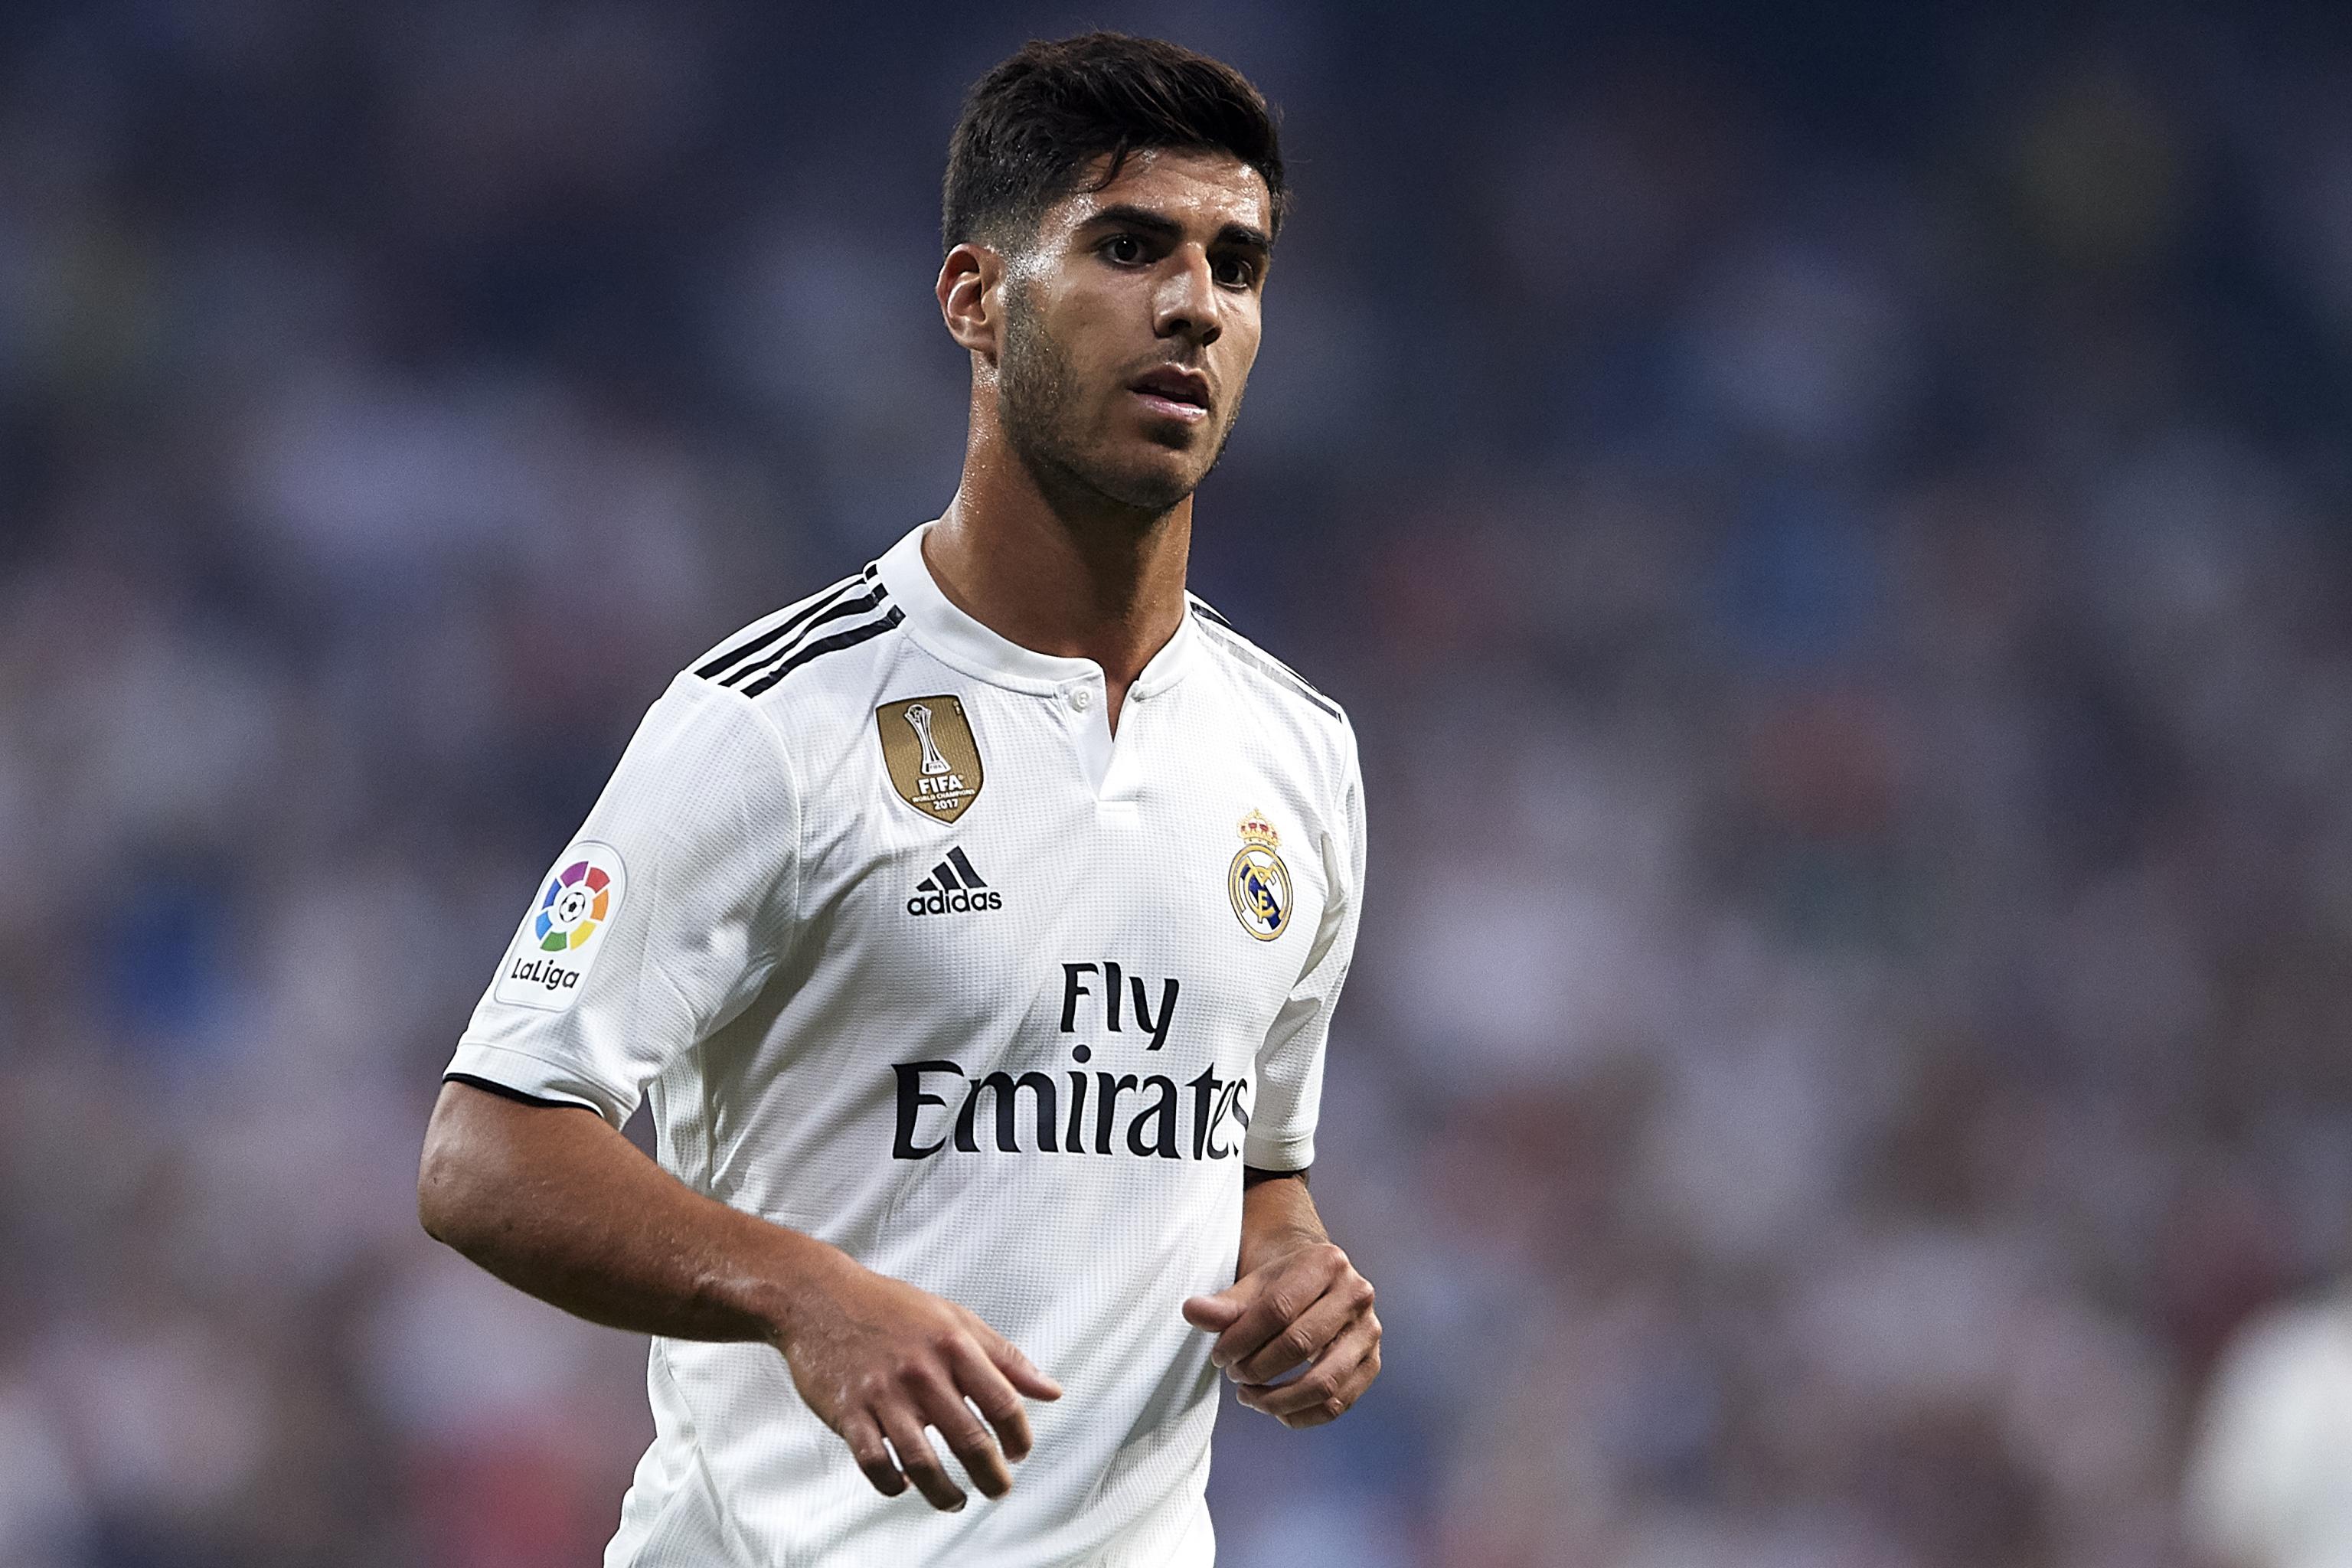 Marco Asensio unveiled as a new PSG player